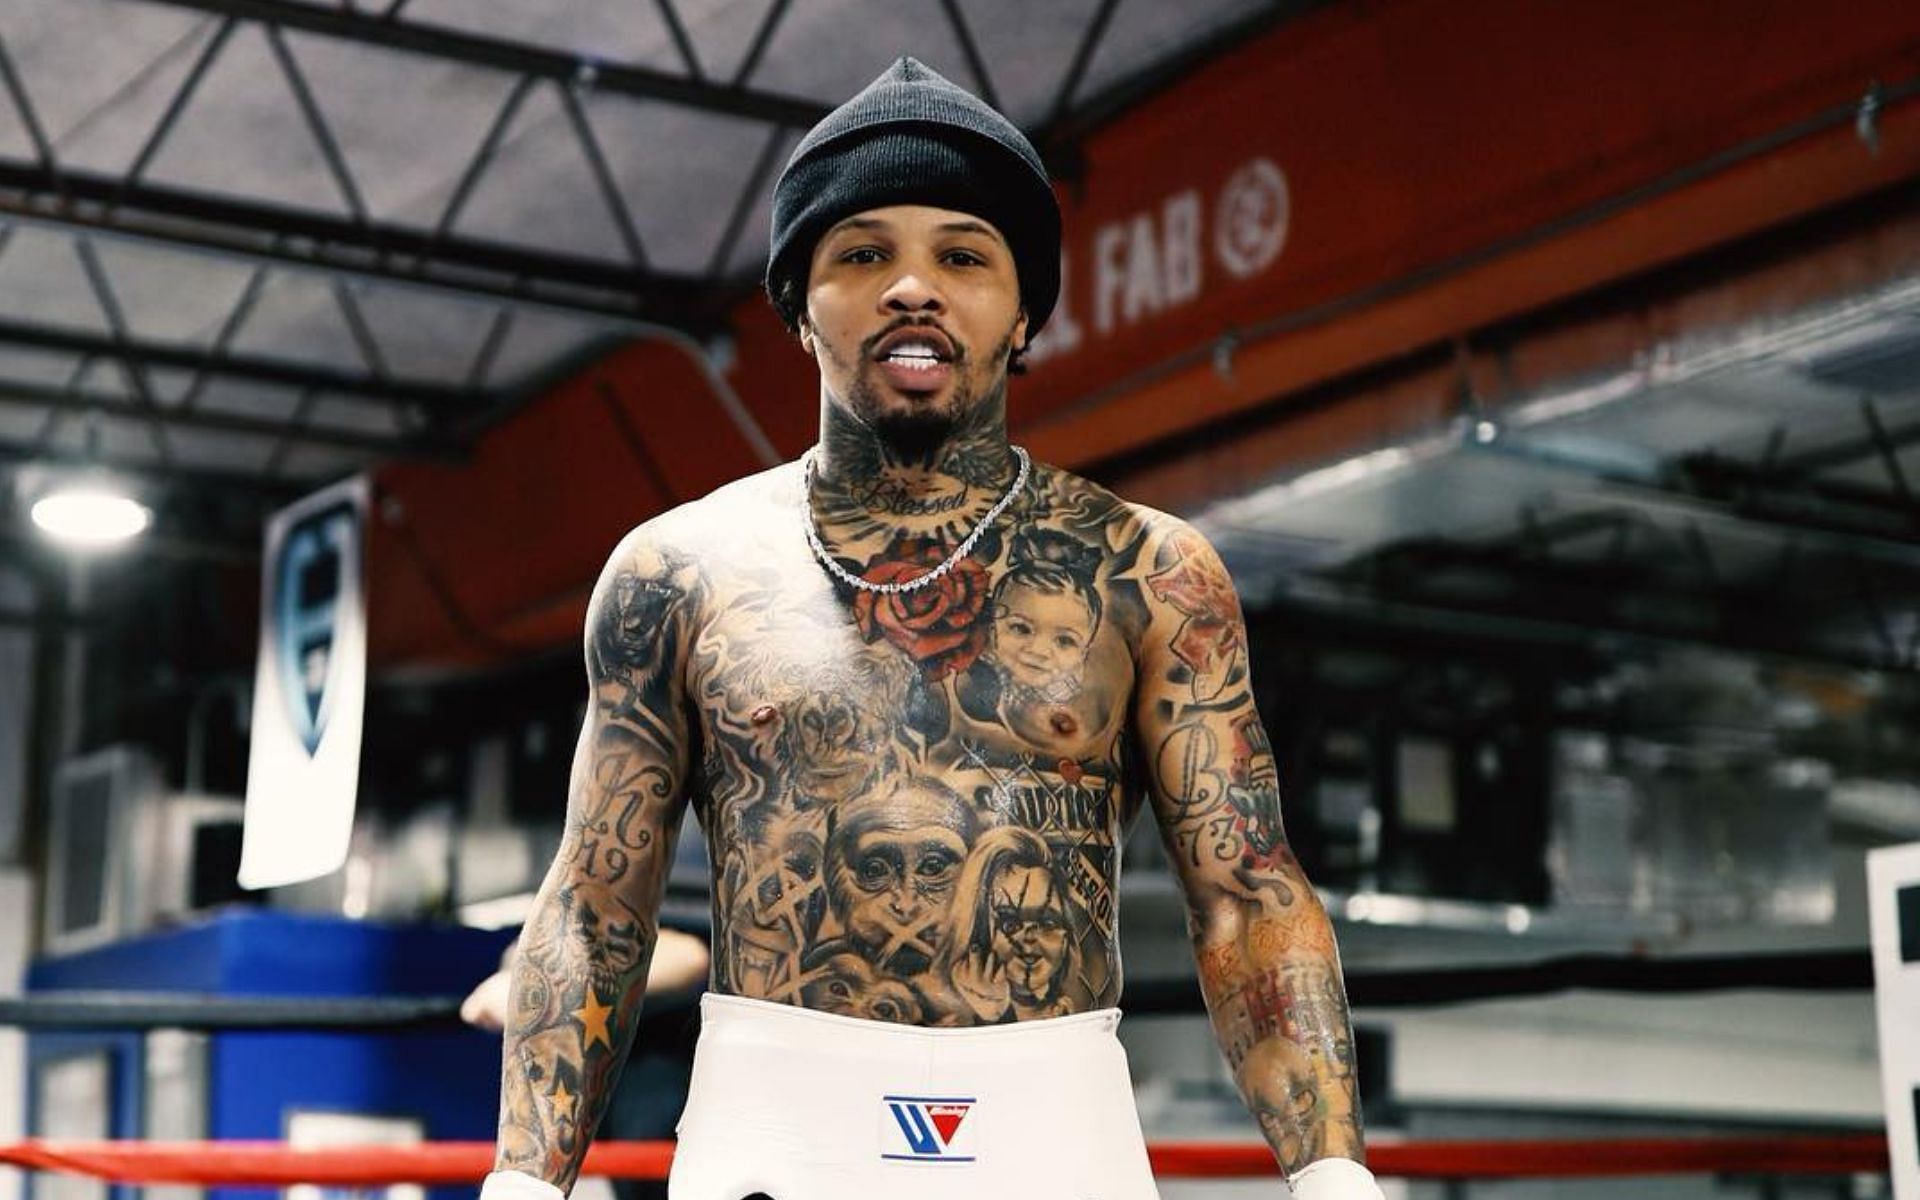 Gervonta Davis is expected to fight this Spring. [Image via @Gervontaa on Instagram]